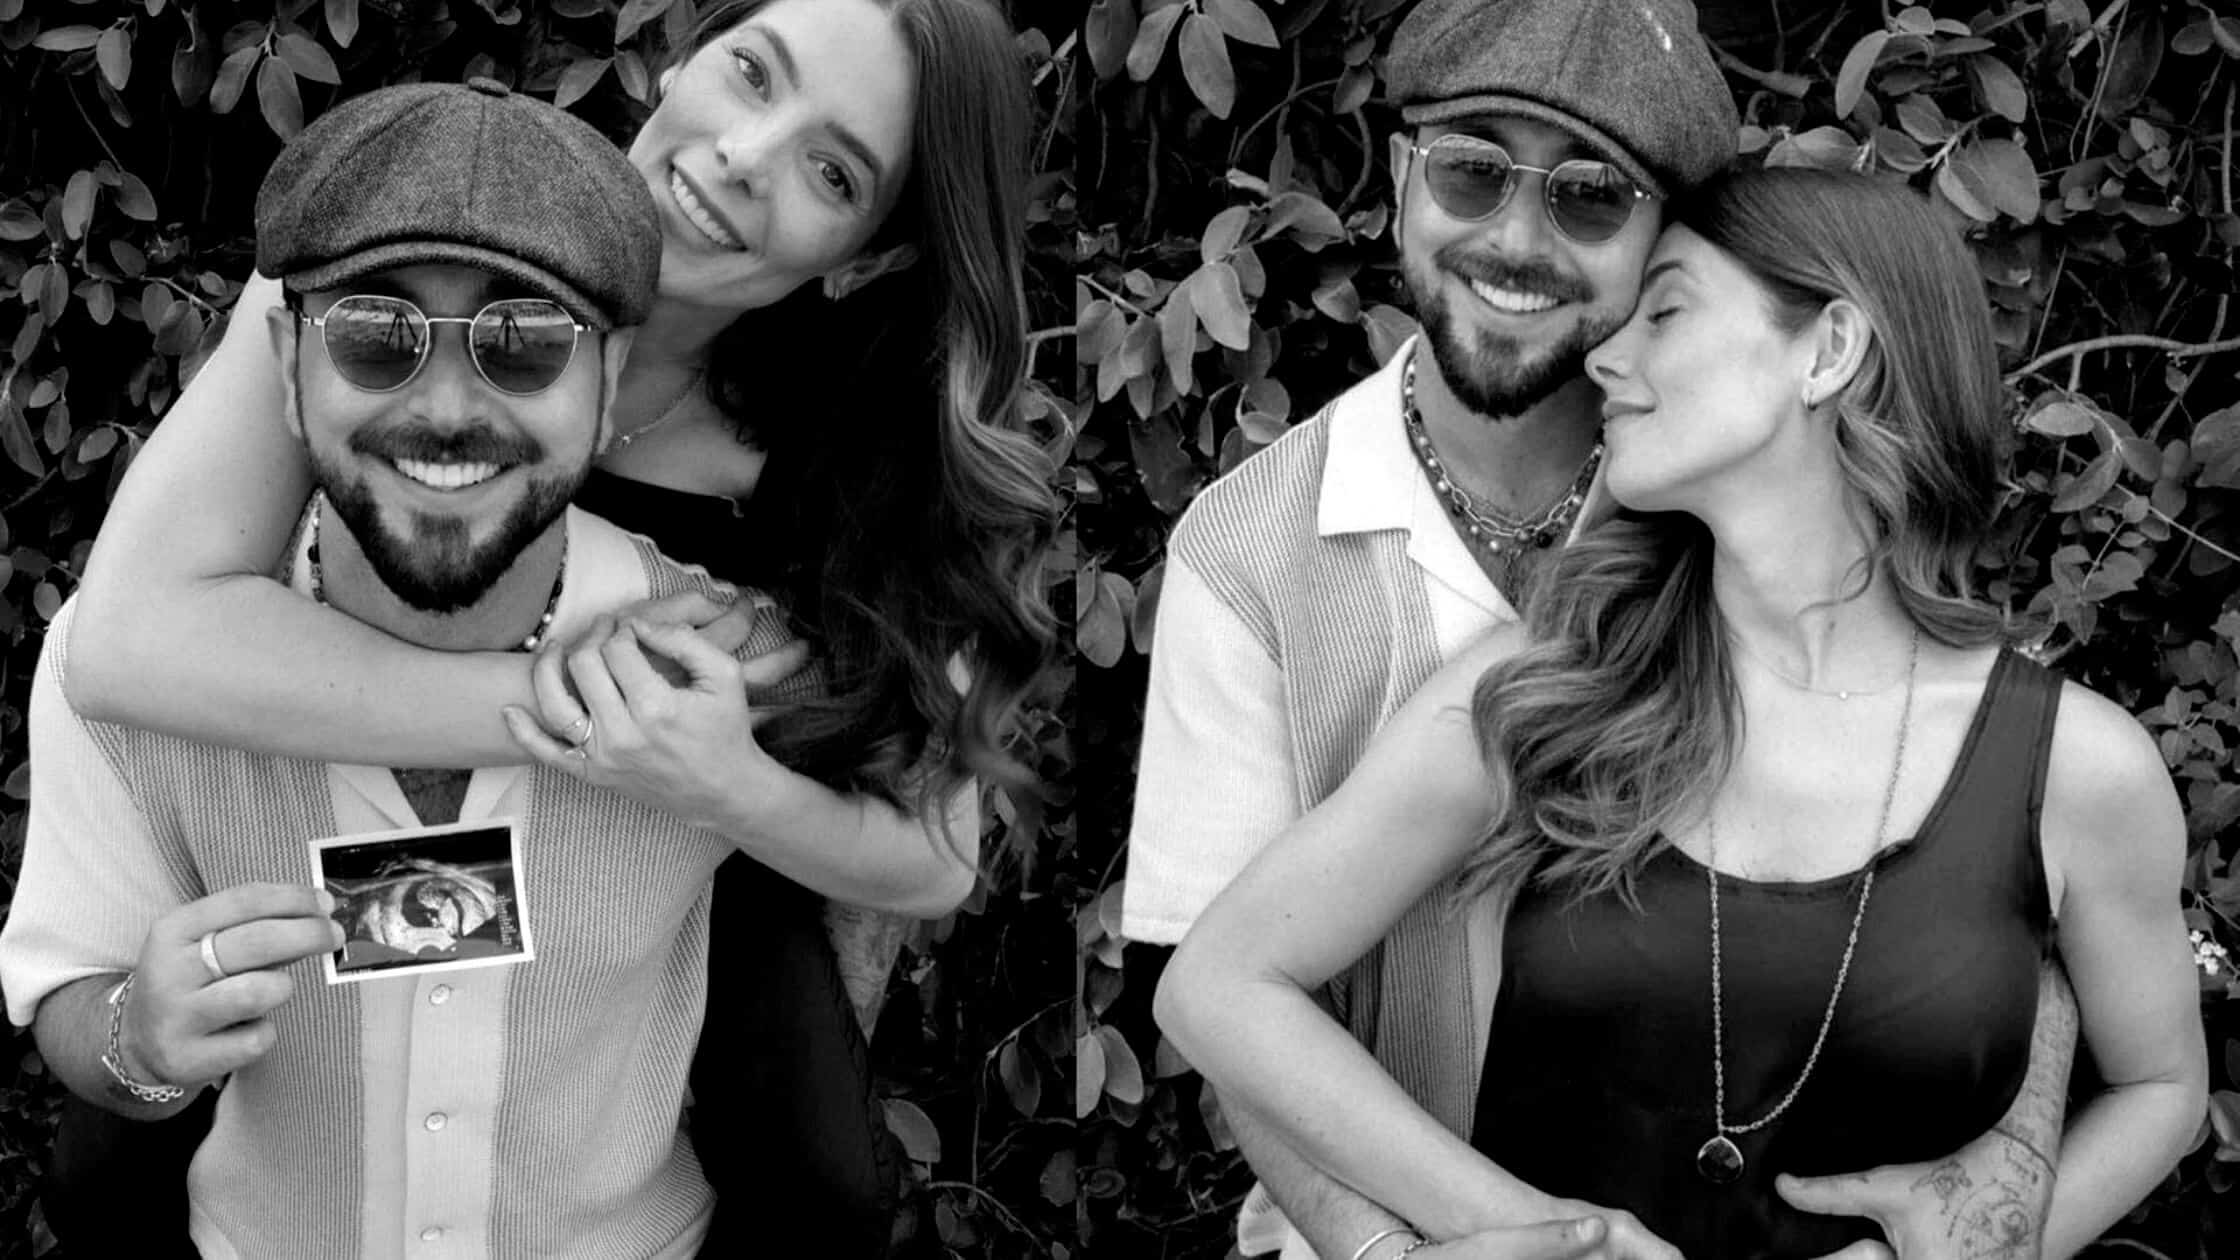 Ashley Greene The Twilight Actress Is Expecting Her First Child With Her Husband Paul Khoury